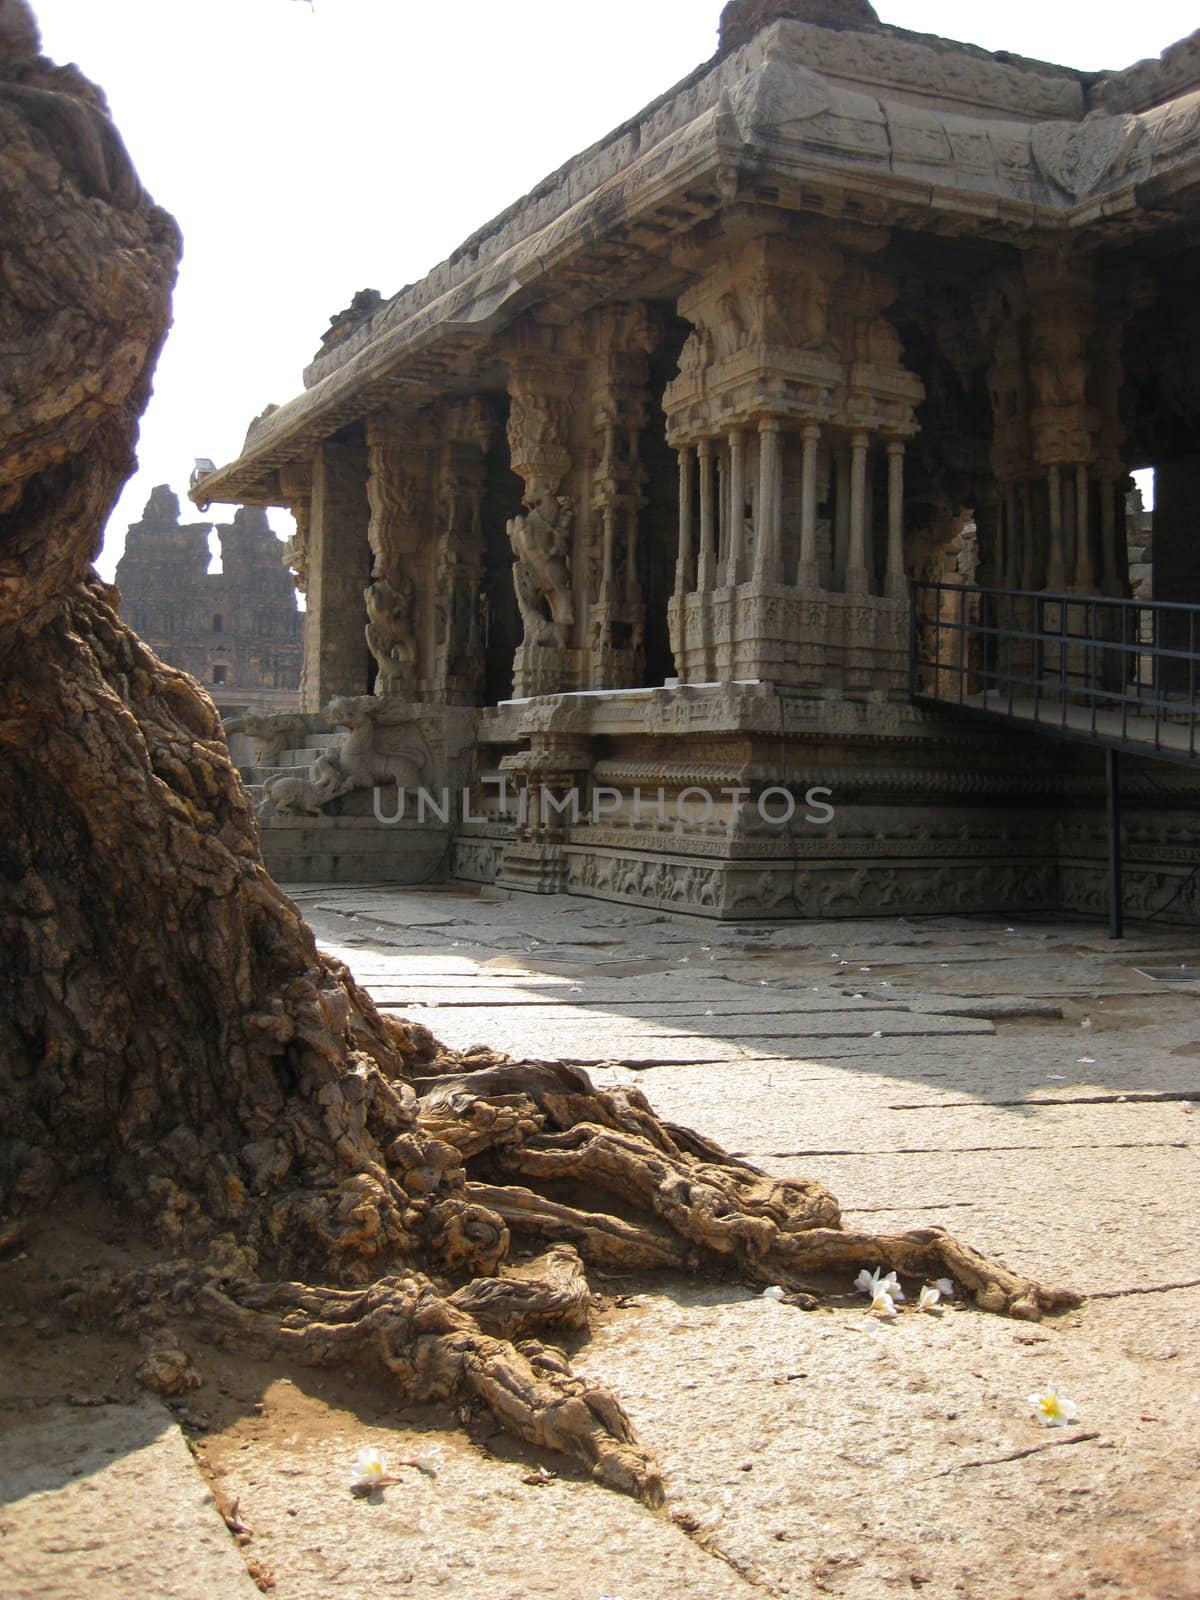 A Picture of an ancient vijaynagar Temple in Hampi, with an old tree in the foreground